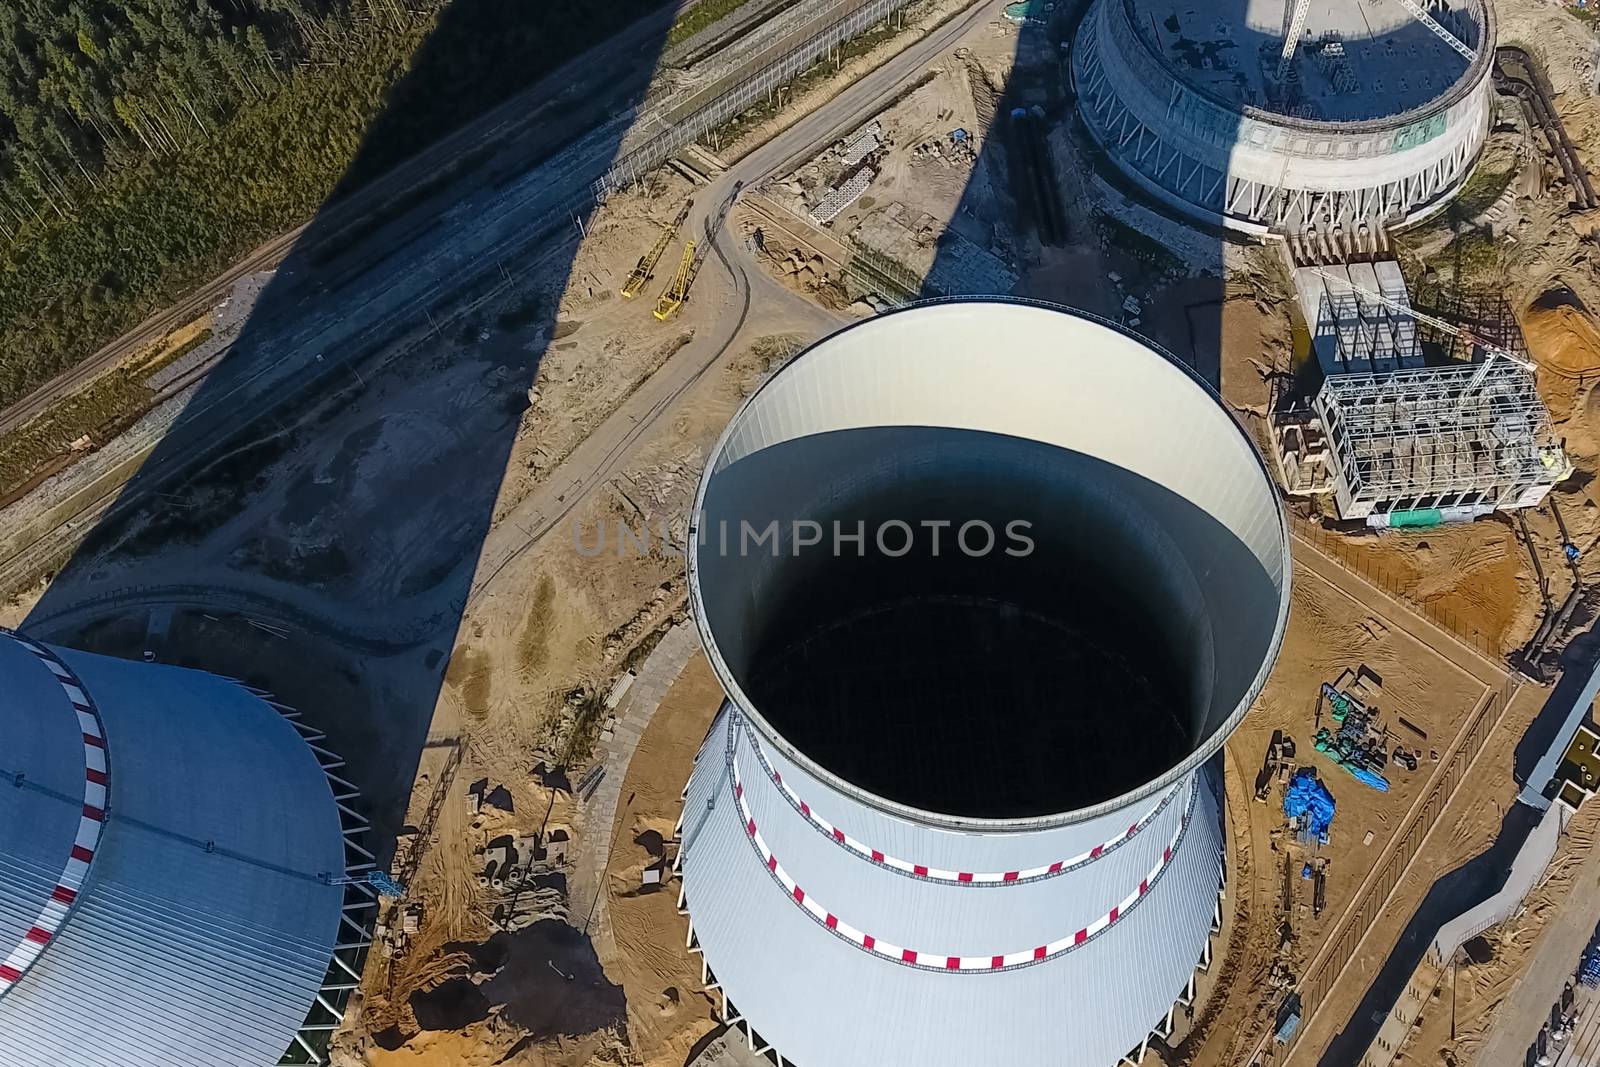 Aerial survey of a nuclear power plant under construction. Insta by nyrok